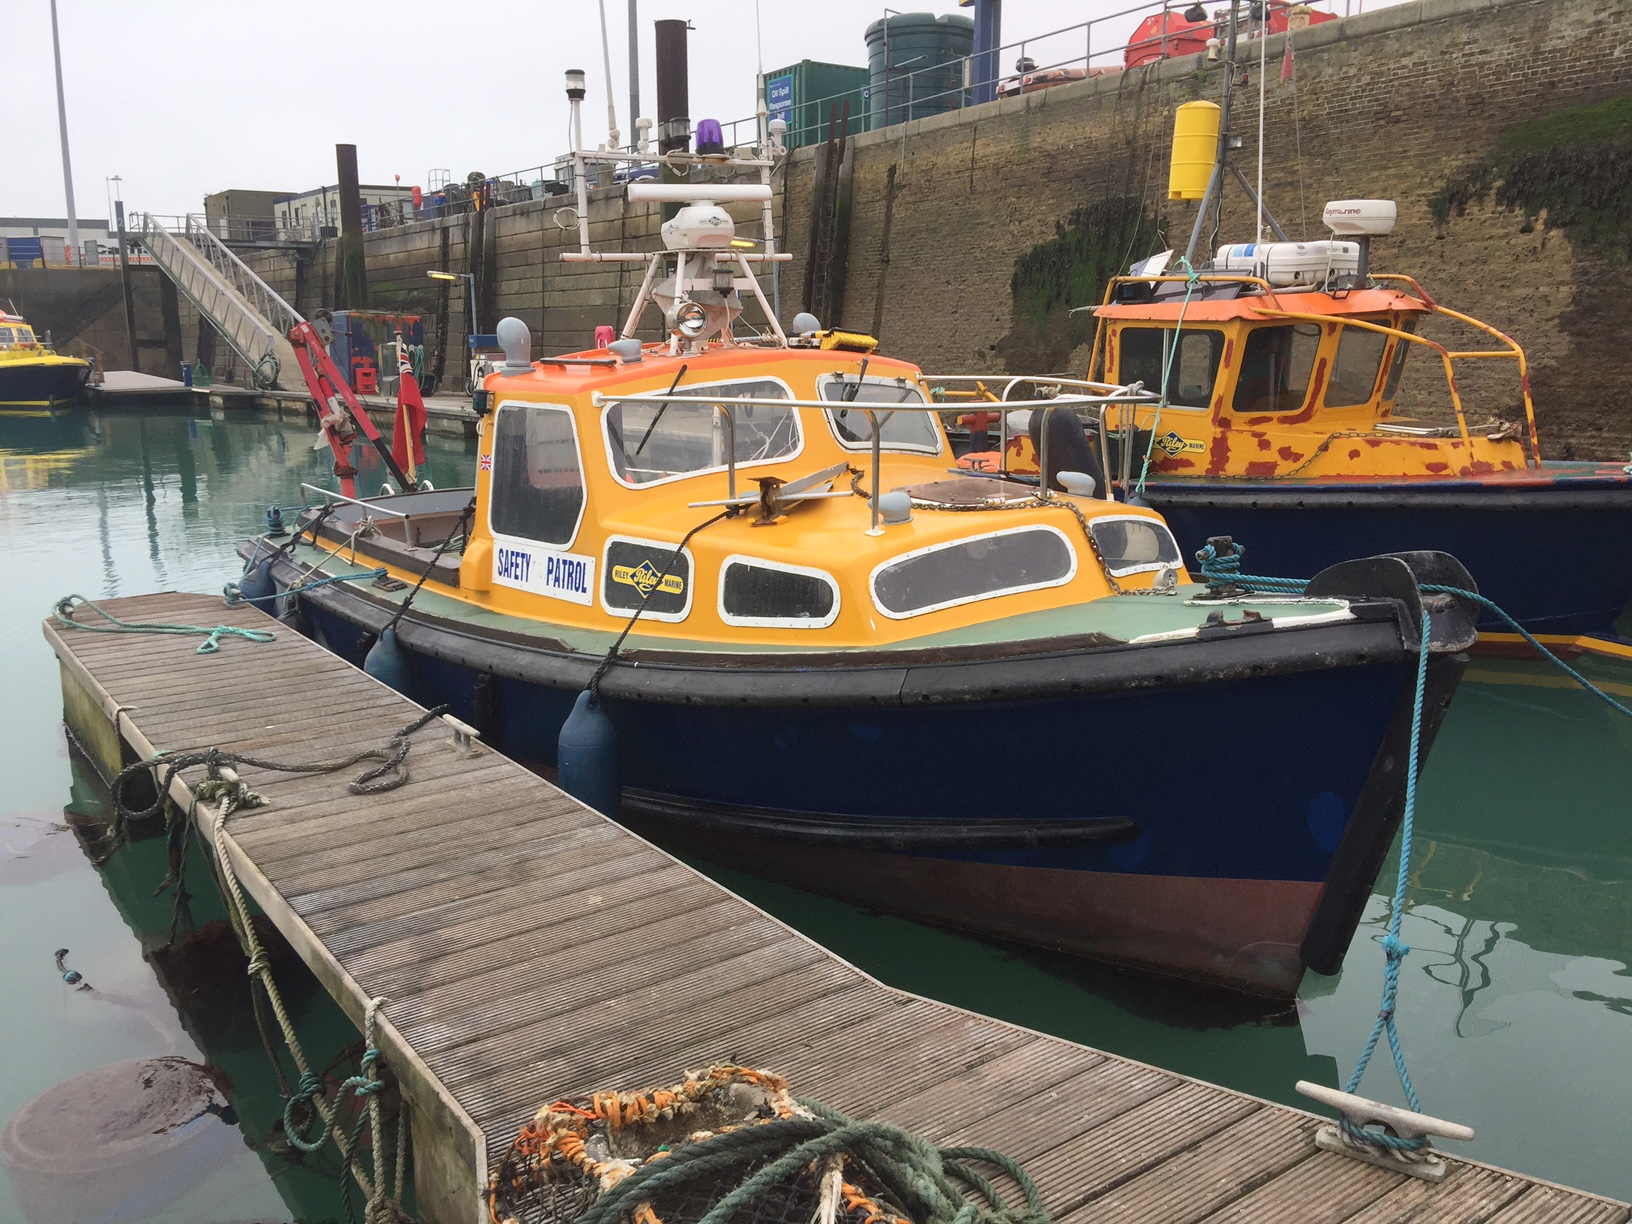 Cheverton work boat for sale - SOLD - Welcome to 